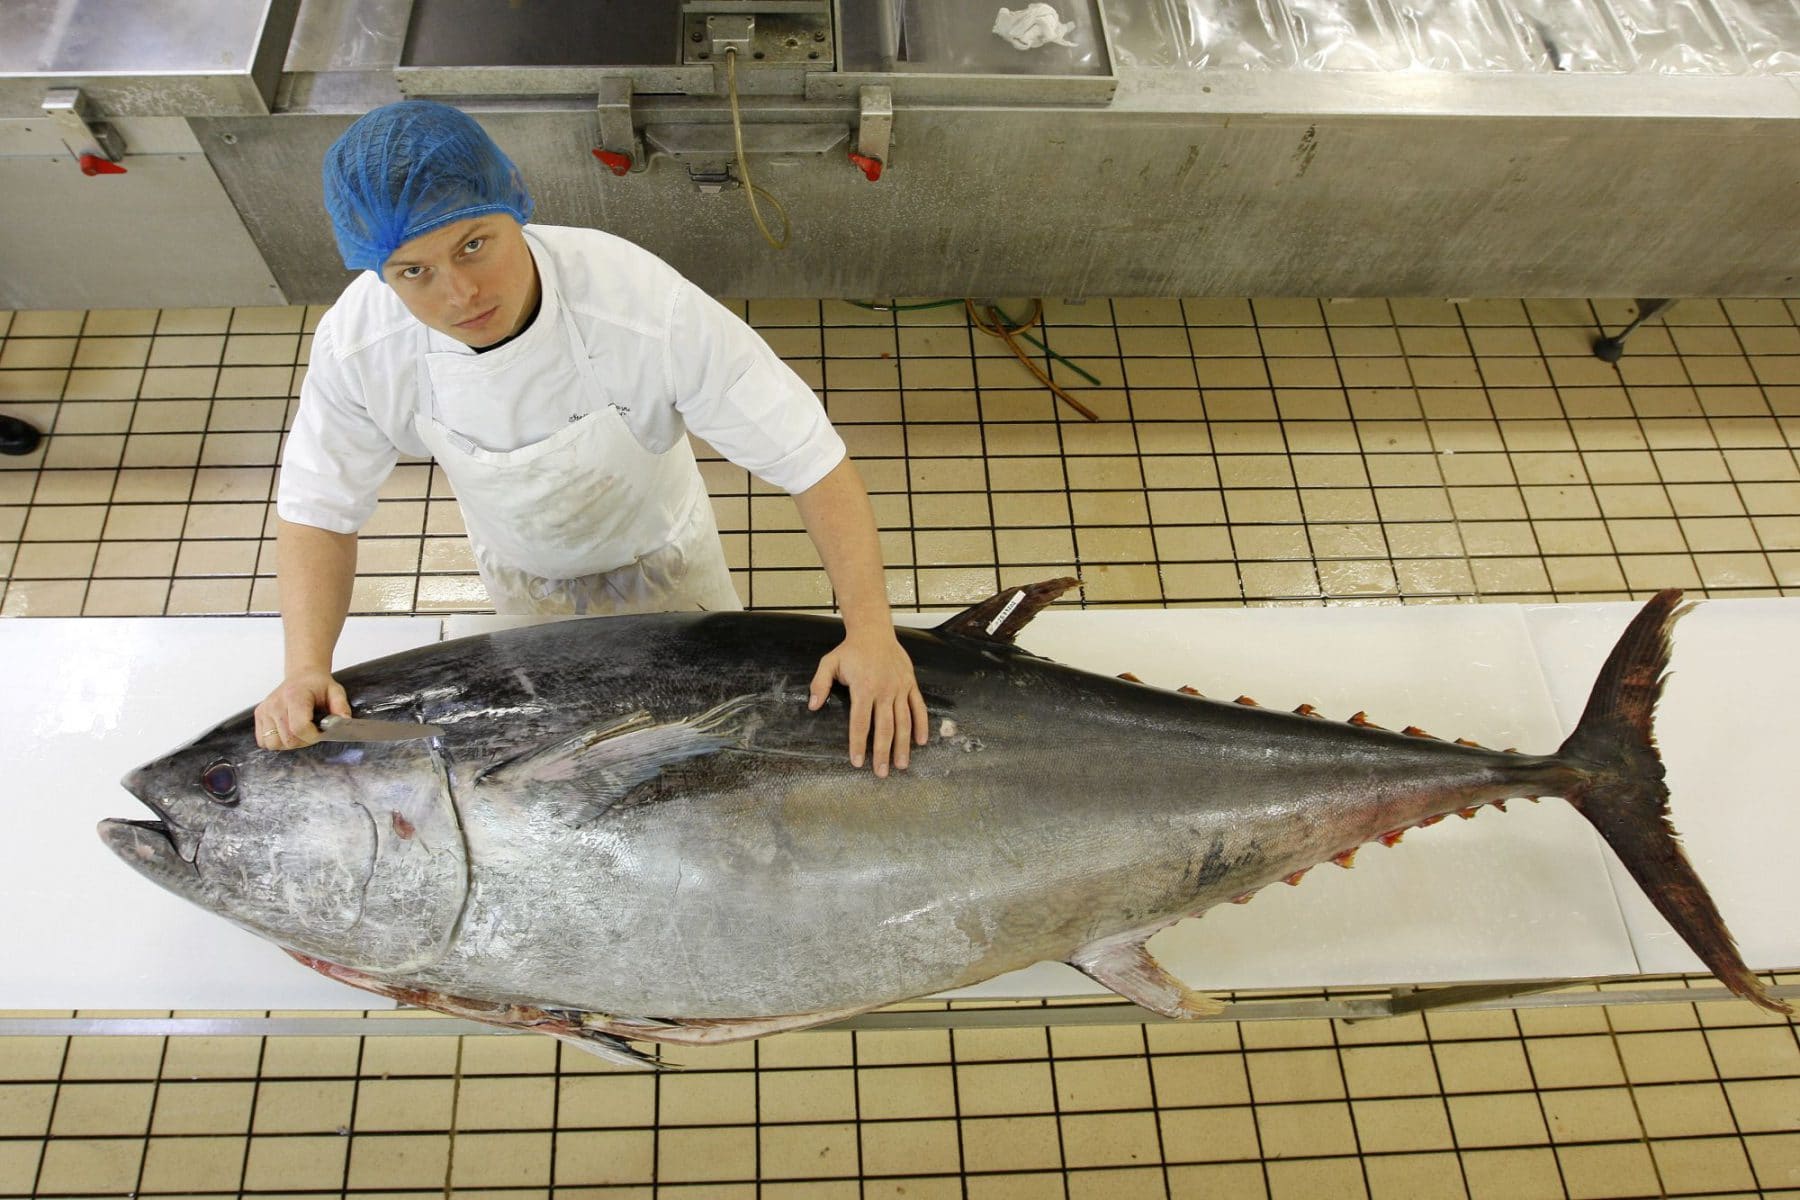 Amendment Not Sufficient to Encourage Tuna Fishing